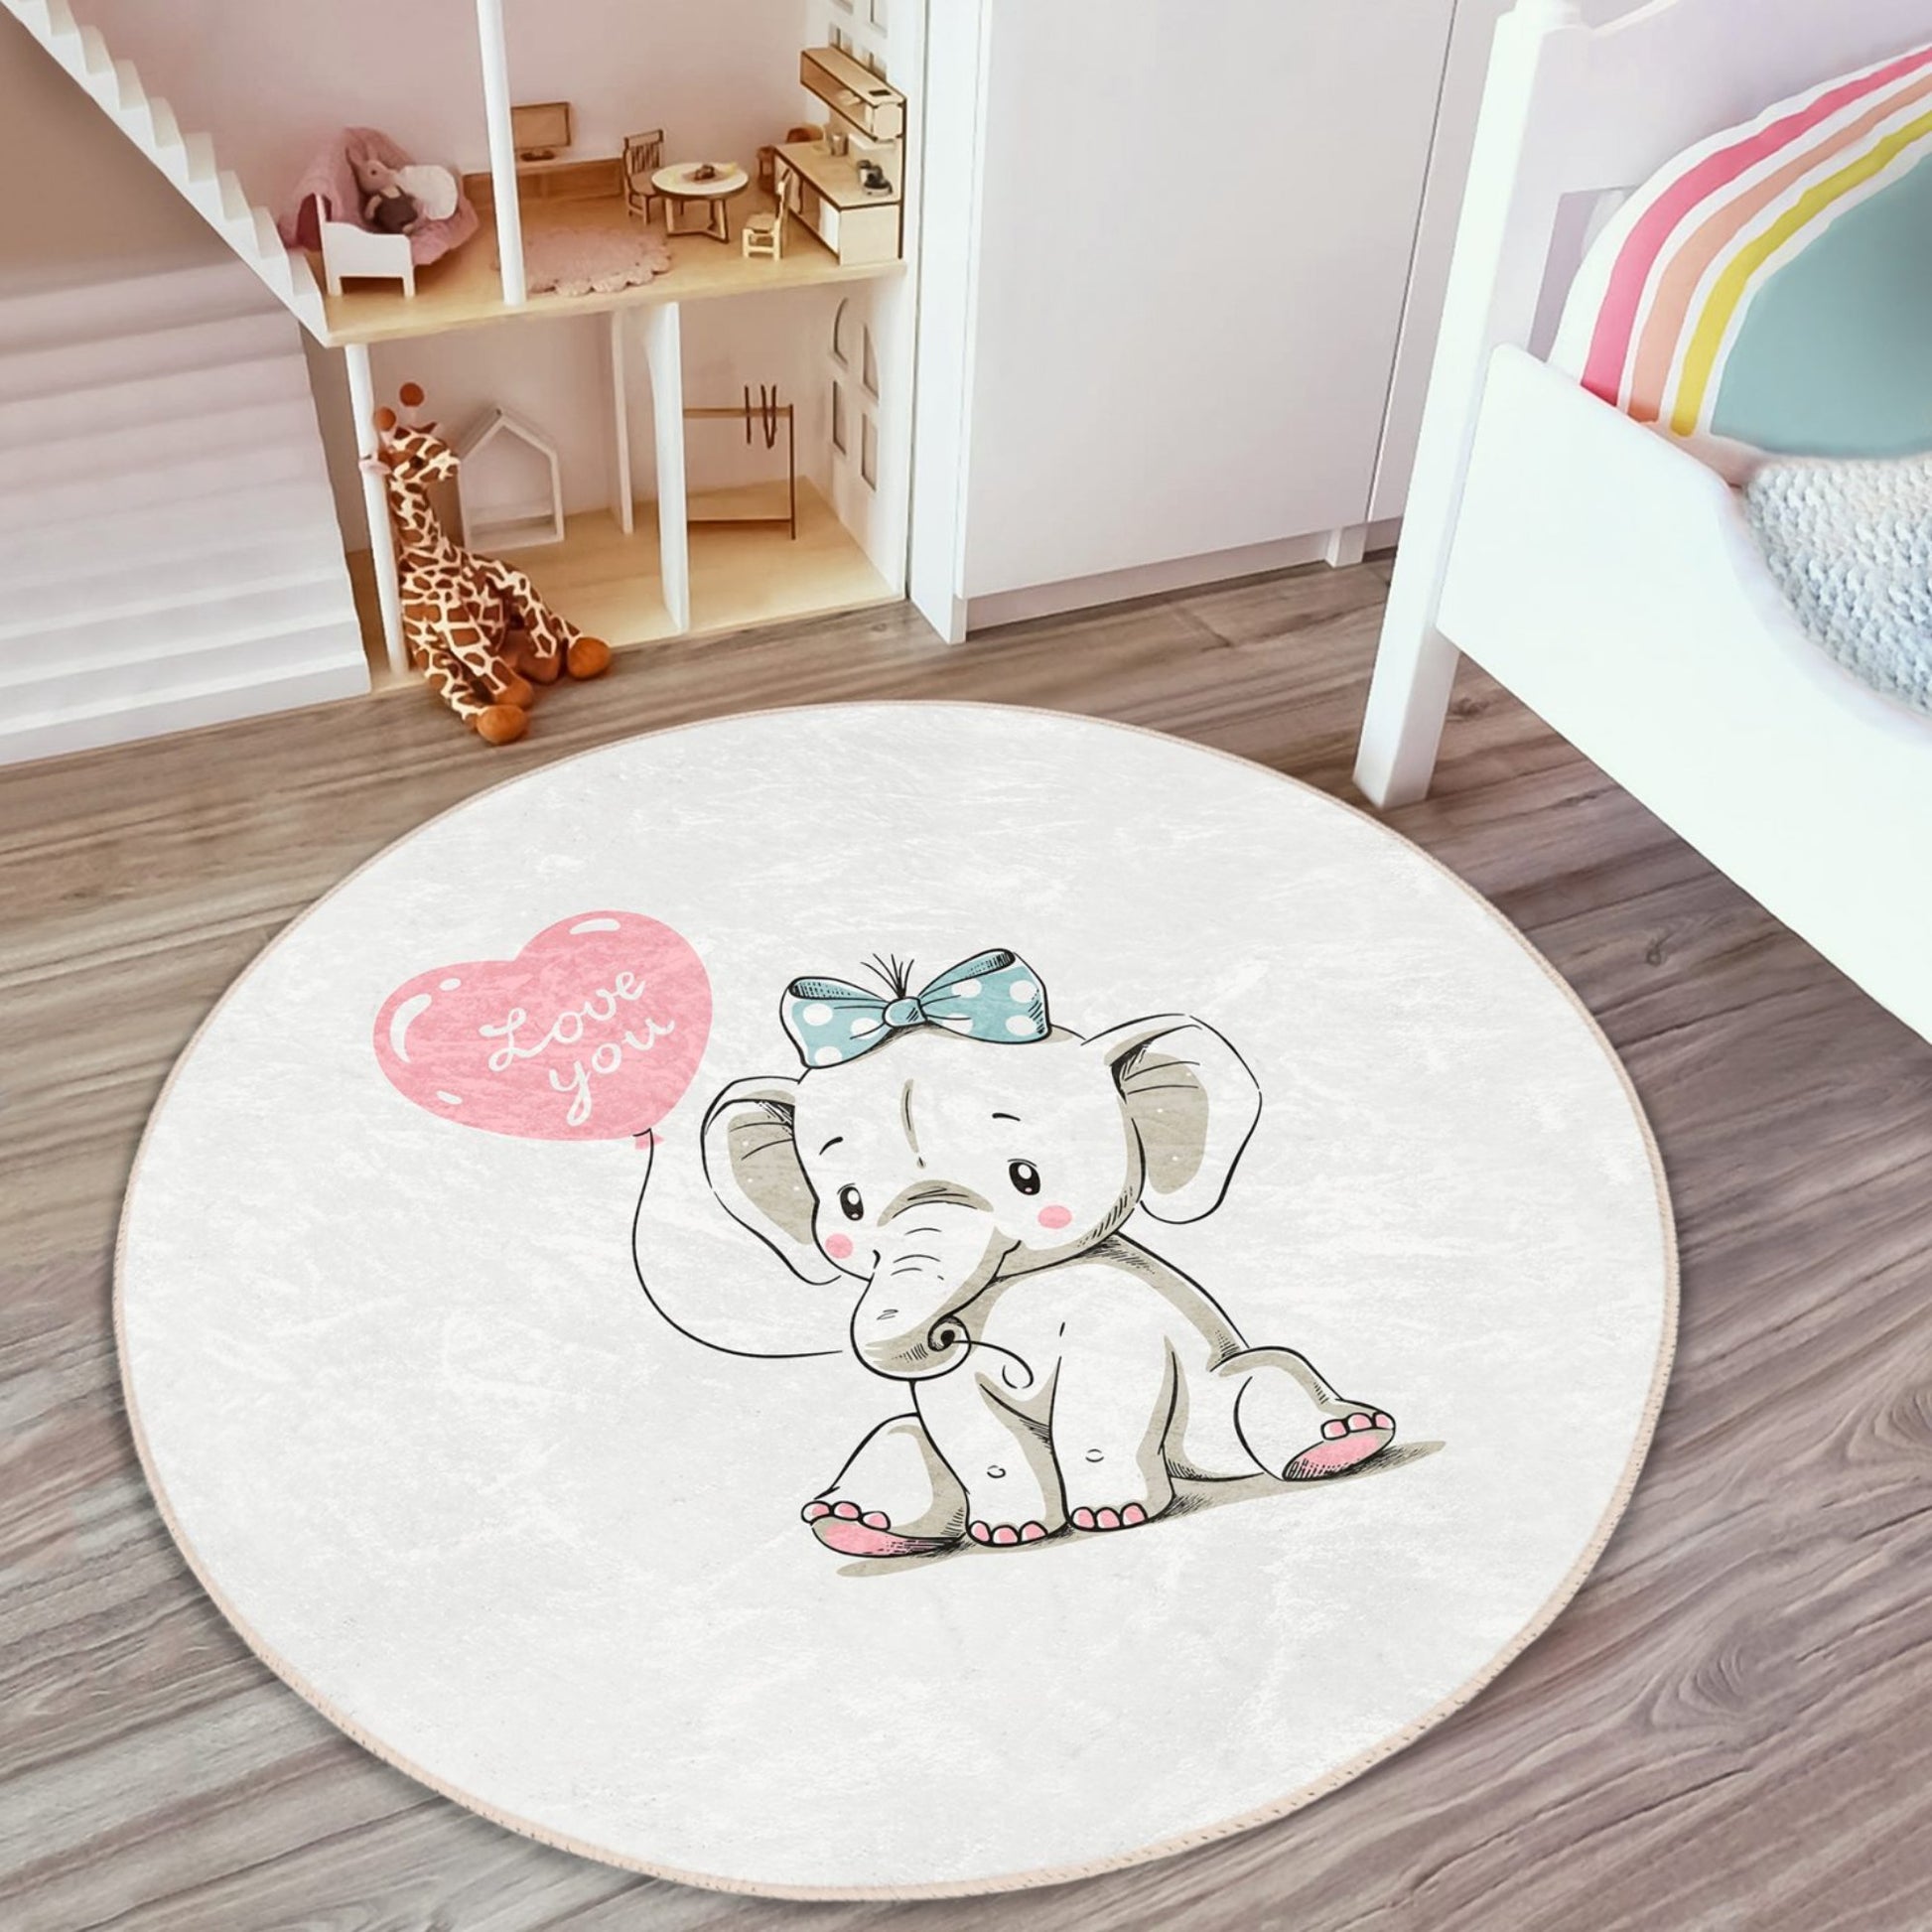 Round Elephant Patterned Floor Rug - Charming Charm